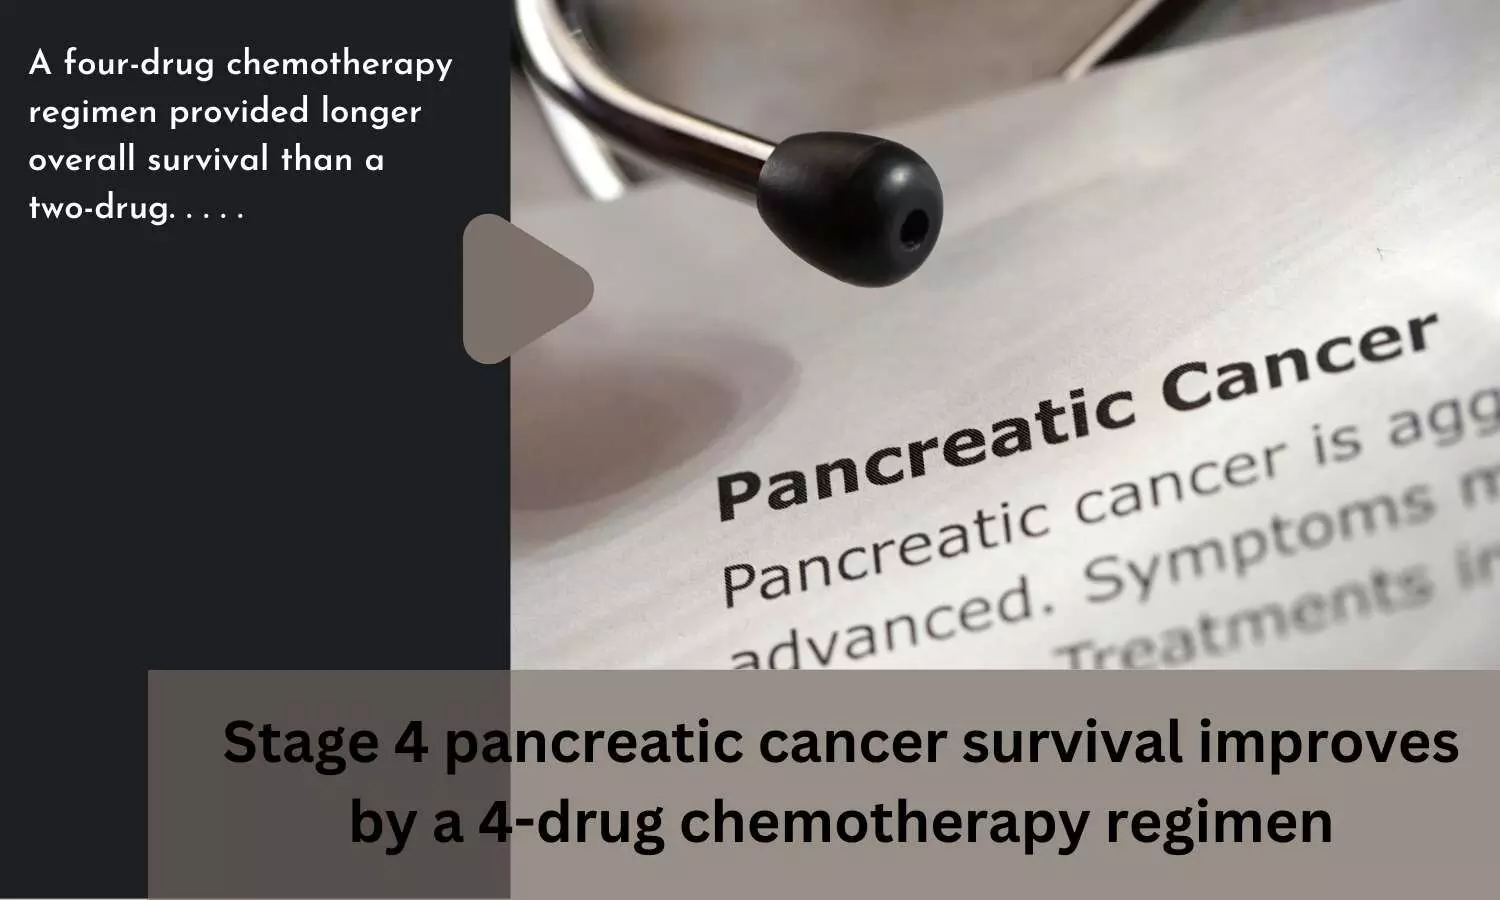 Stage 4 pancreatic cancer survival improves by a 4-drug chemotherapy regimen